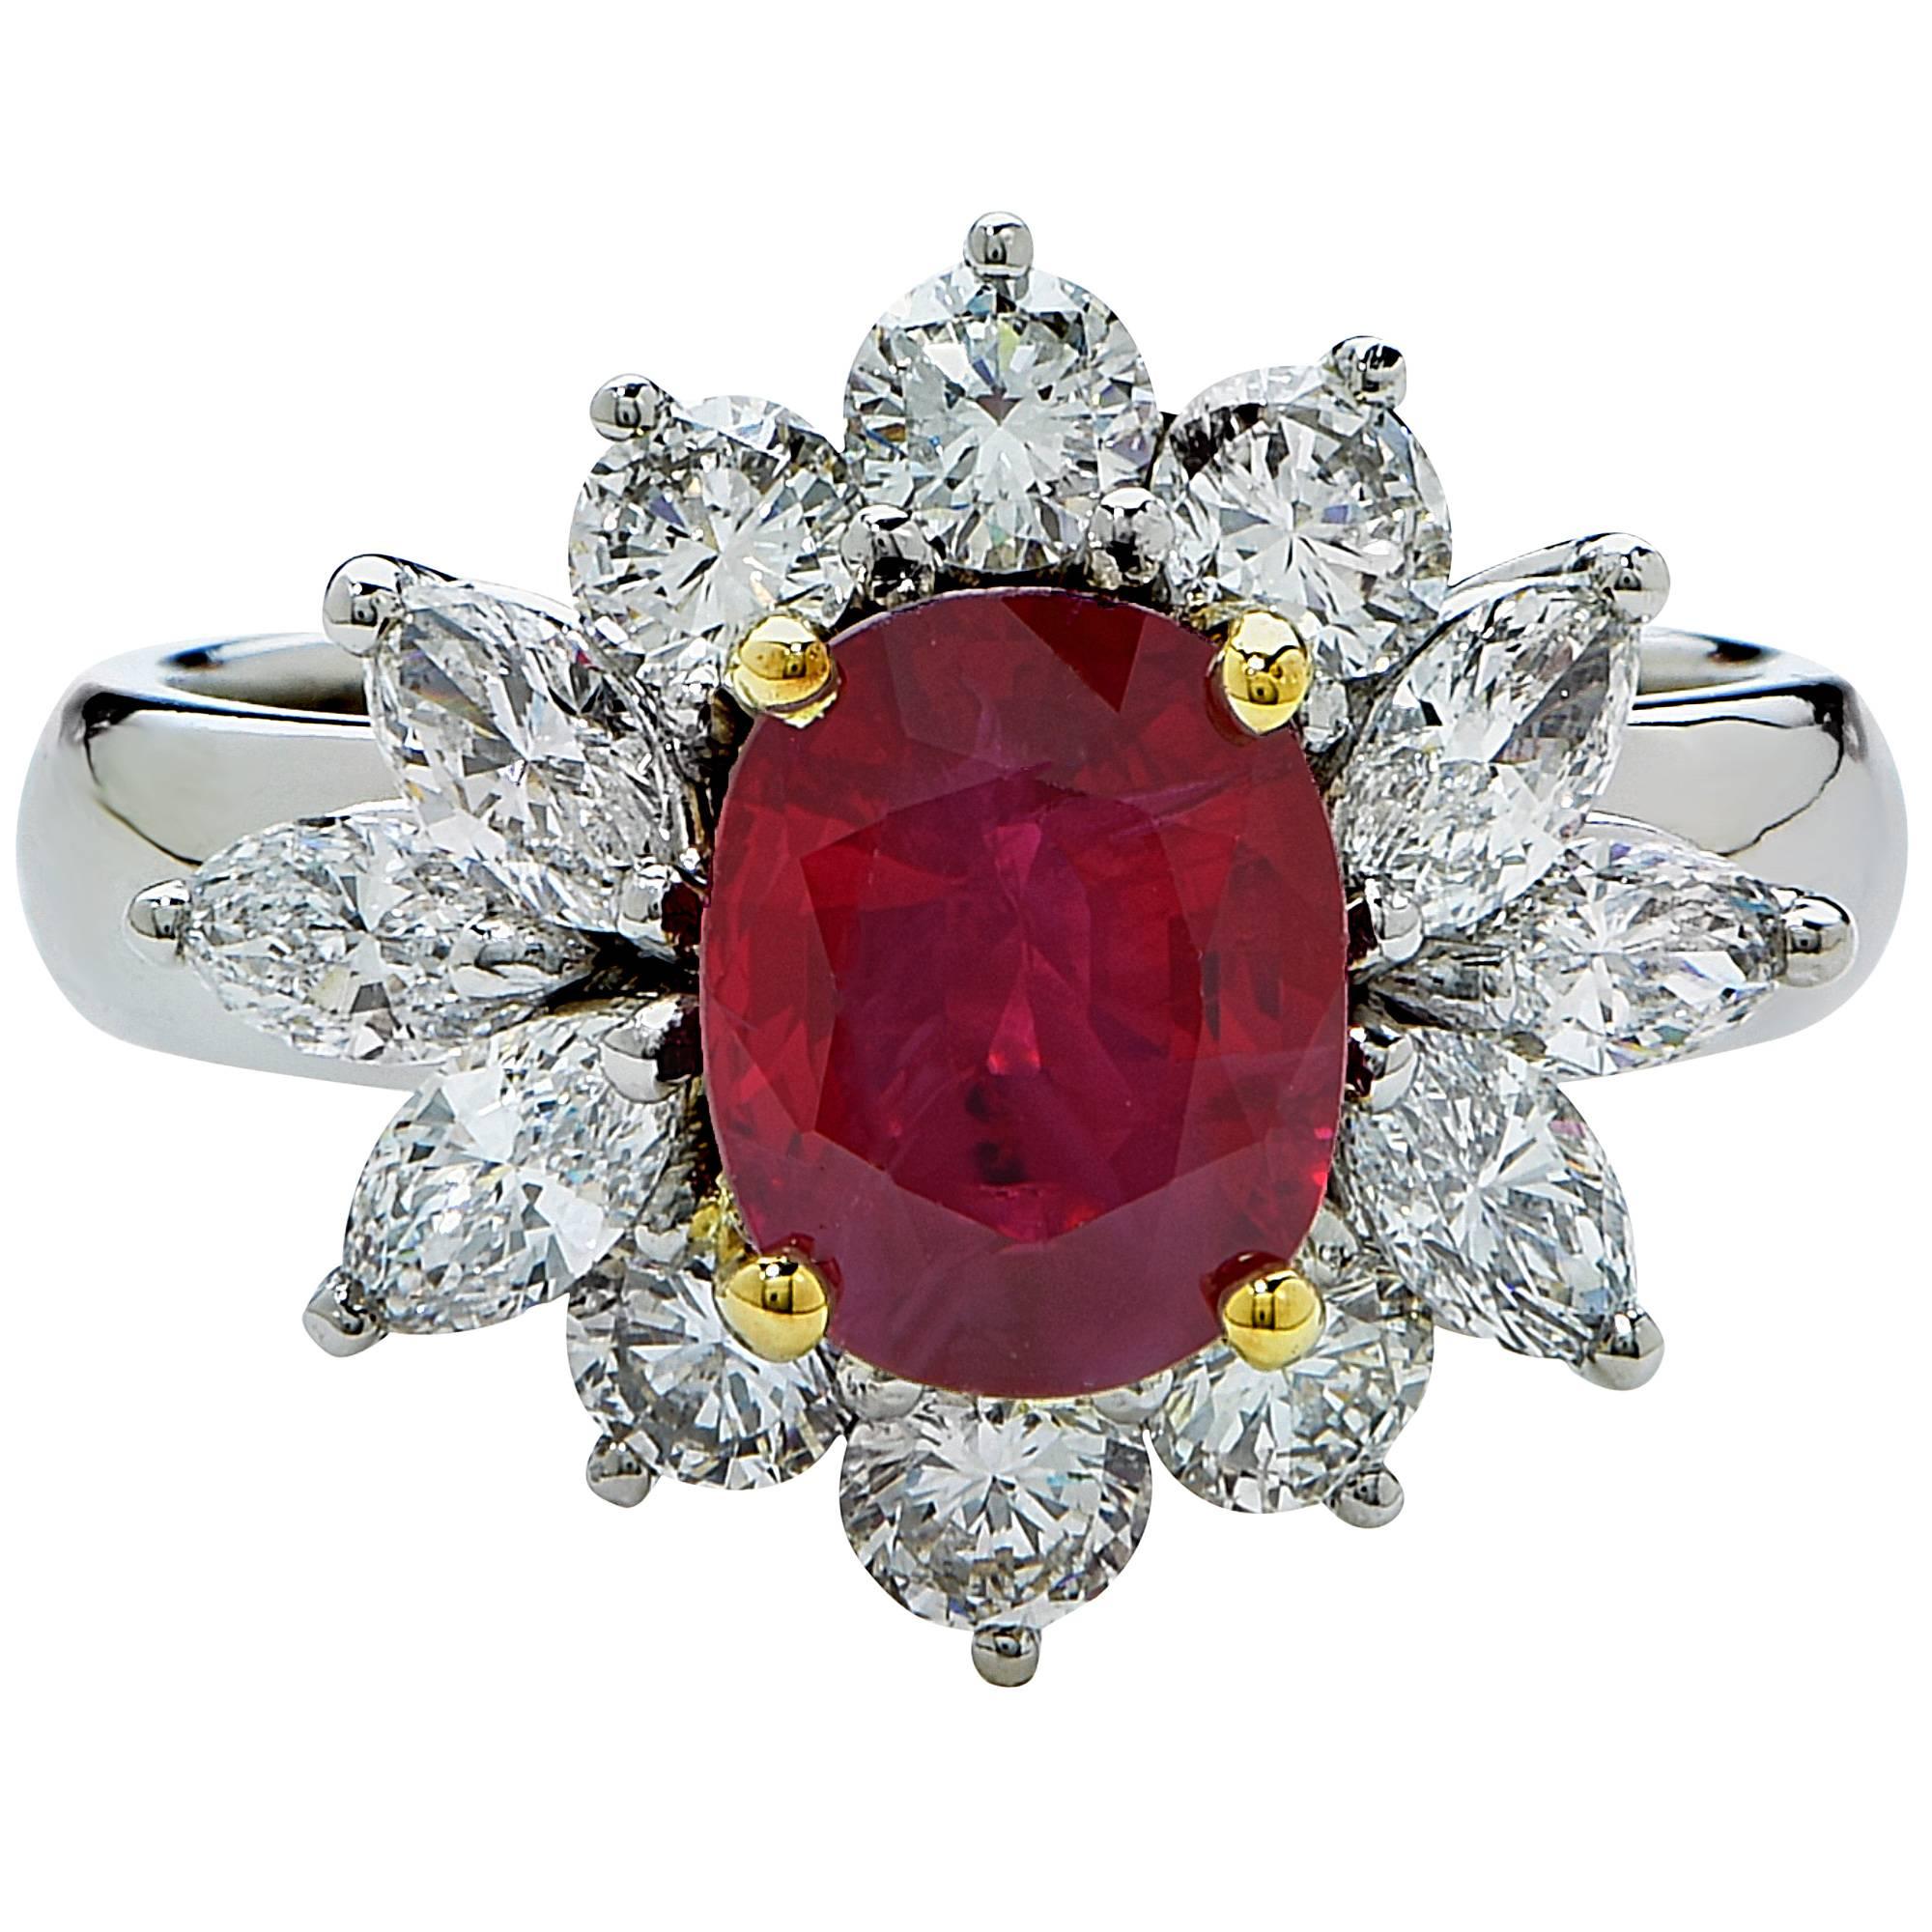 Platinum and 18k yellow gold ring featuring a 2.18ct oval cut heated Burma ruby accented by 12 round brilliant and marquise cut diamonds weighing approximately 1.8cts total, G color VS clarity.

The ring is a size 6.5 and can be sized up or